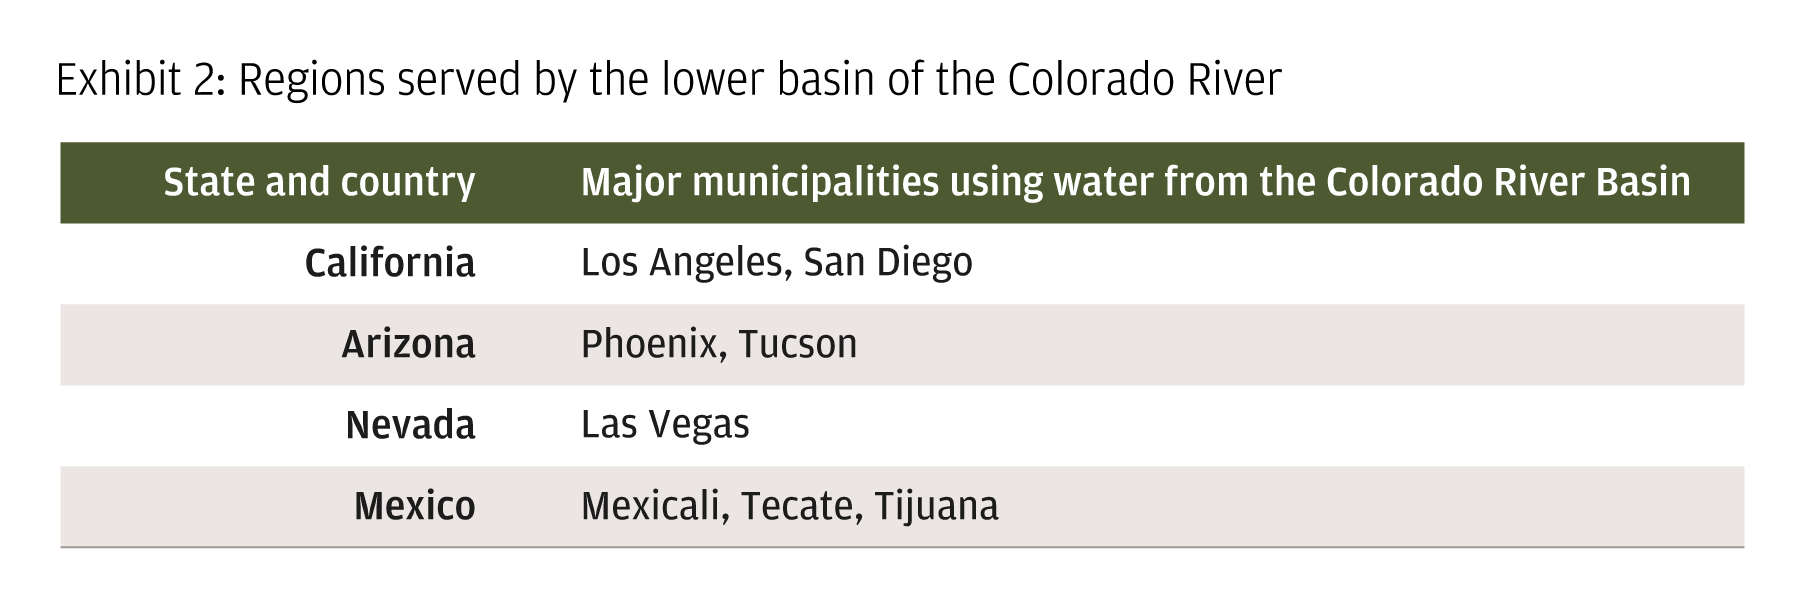 Table shows the cities that rely on Colorado River water: Los Angeles, San Diego, Phoenix, Tuscon, Flagstaff, Las Vegas, and in Mexico: Mexicali, Tecate, Tijuana.